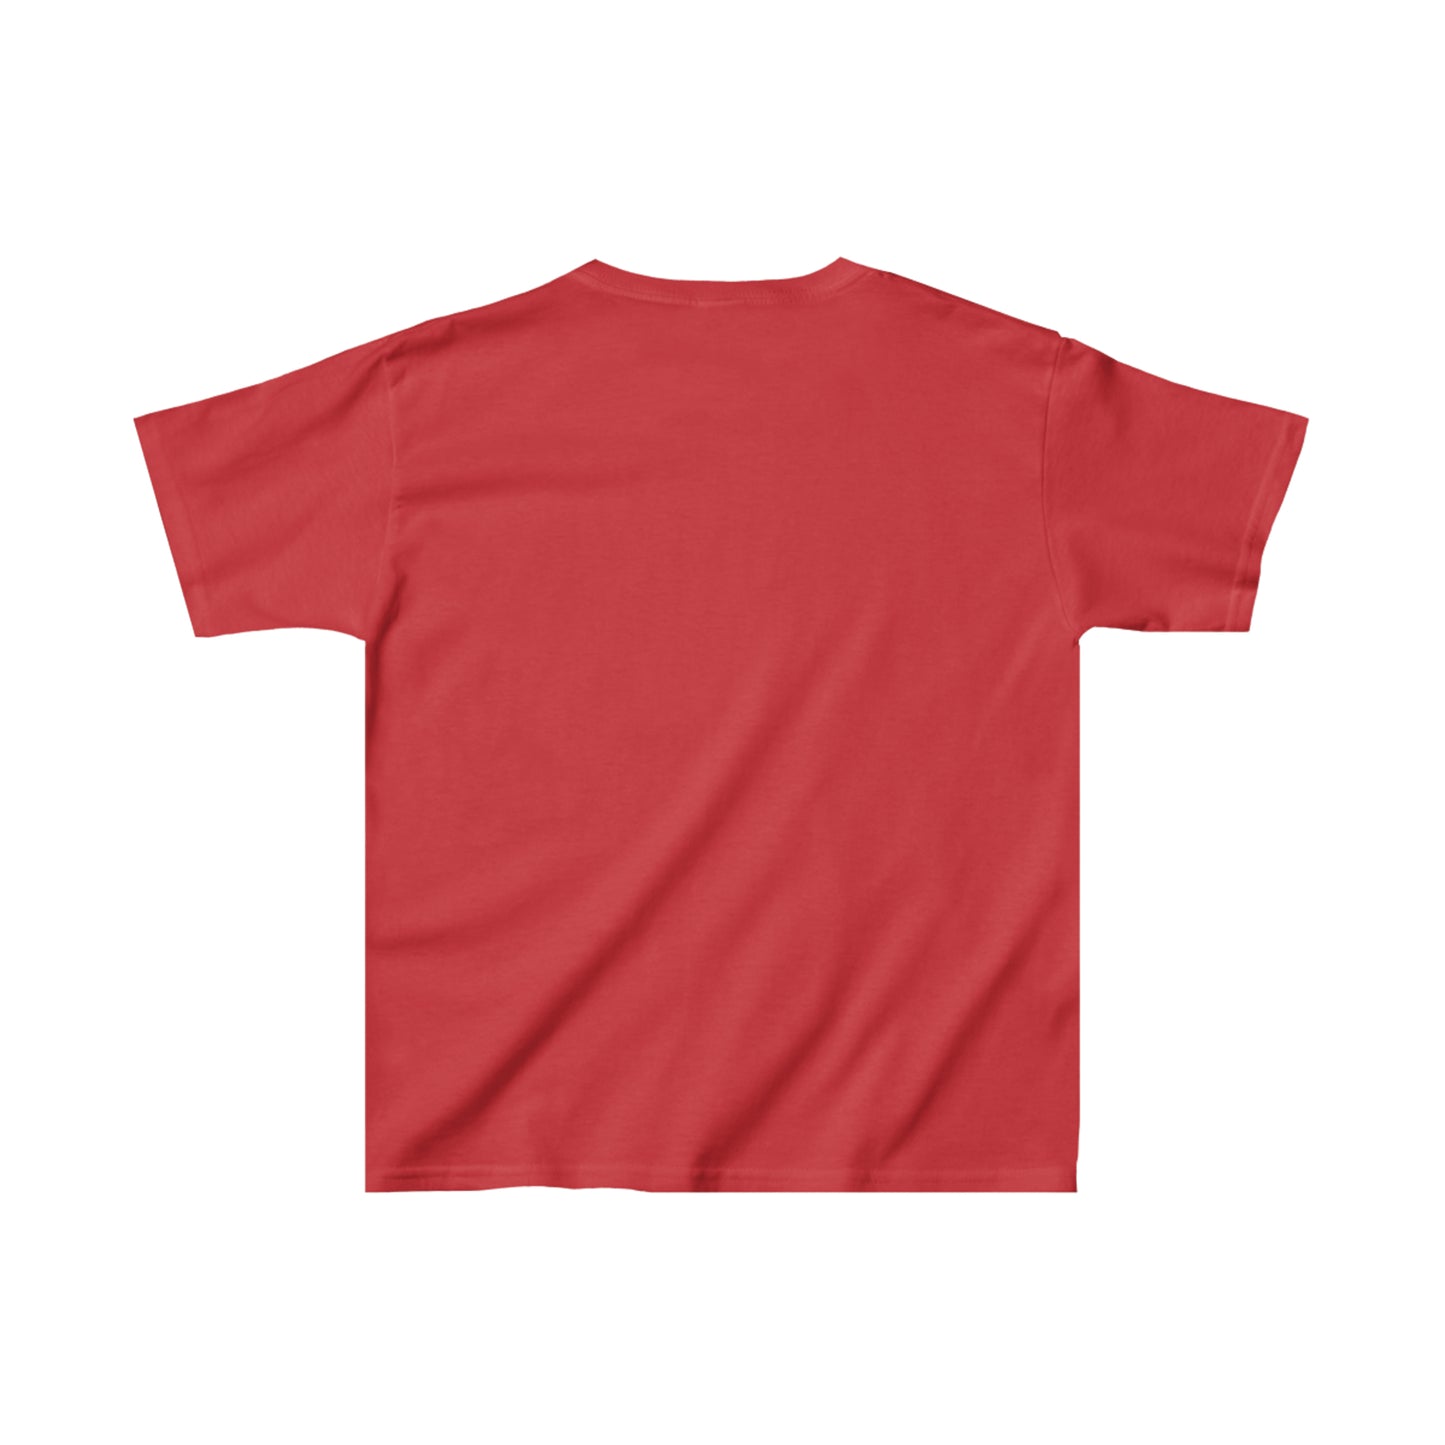 YOUTH - Braves Football Cotton Short Sleeve Tee